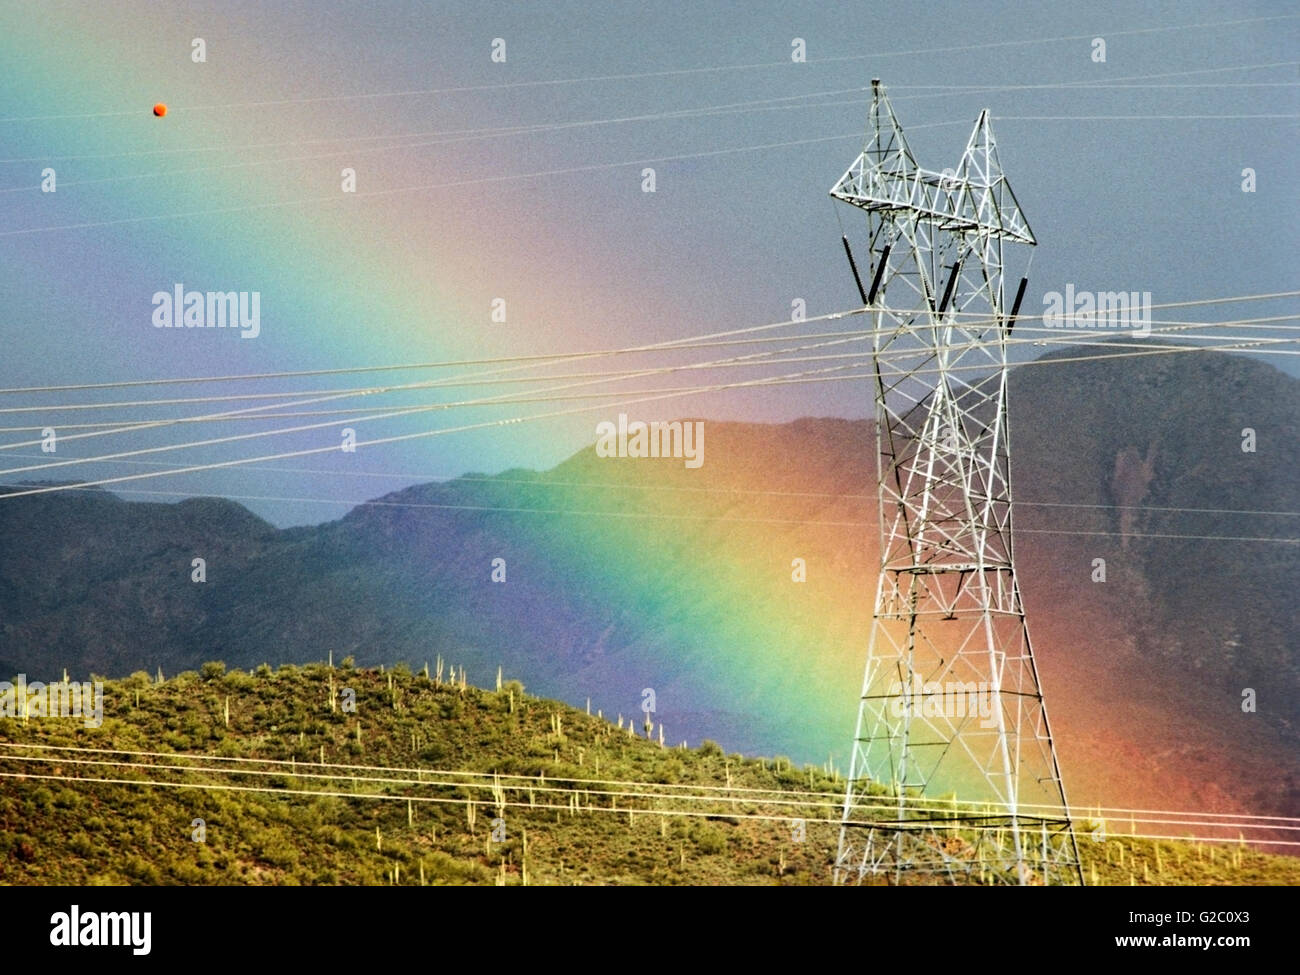 Electrical transmission lines and towers with a vivid, dramatic rainbow in the desert north of Phoenix, Arizona, USA Stock Photo